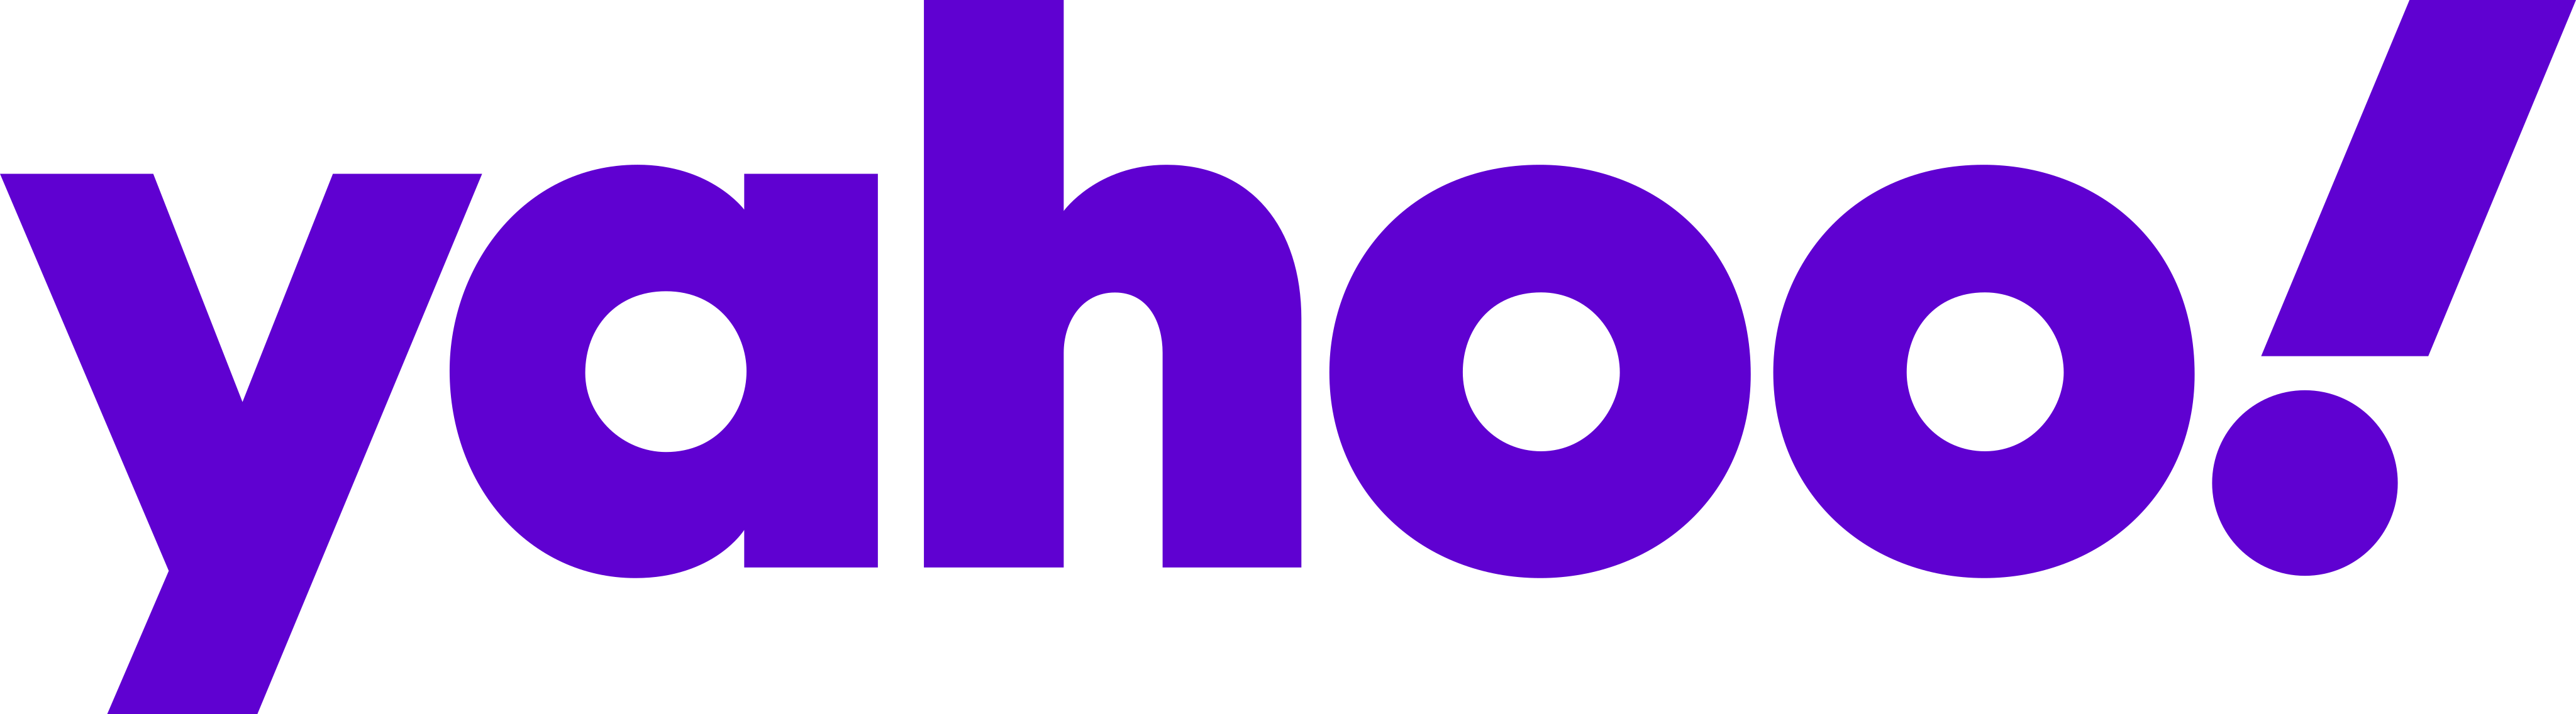 Yahoo! Background PNG